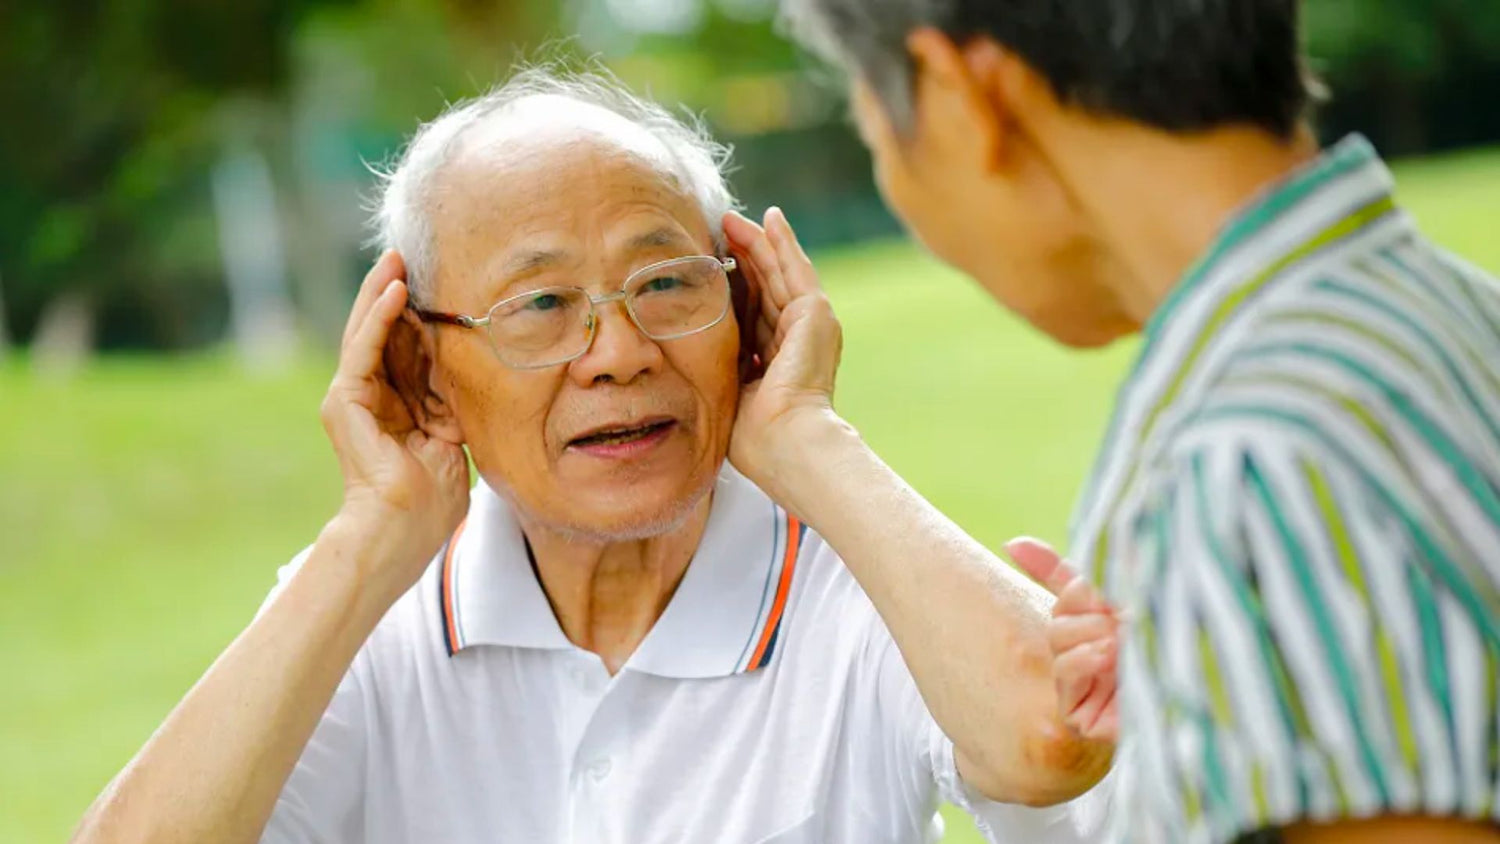 Presbycusis Age-Related Hearing Loss @ SOUNDLIFE Hearing Center Indonesia